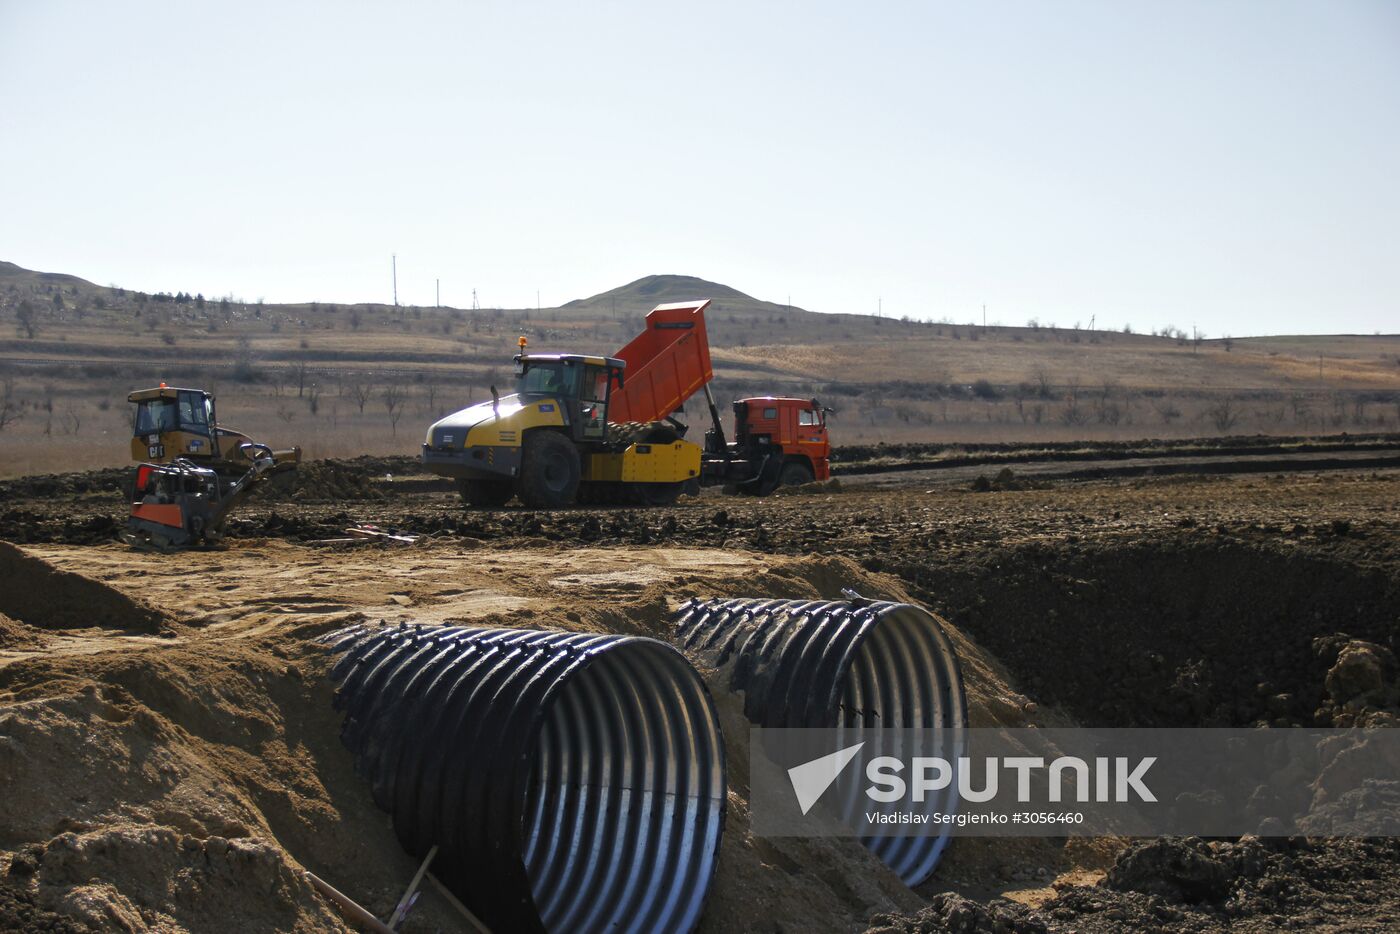 Approach road under construction to bridge across the Strait of Kerch